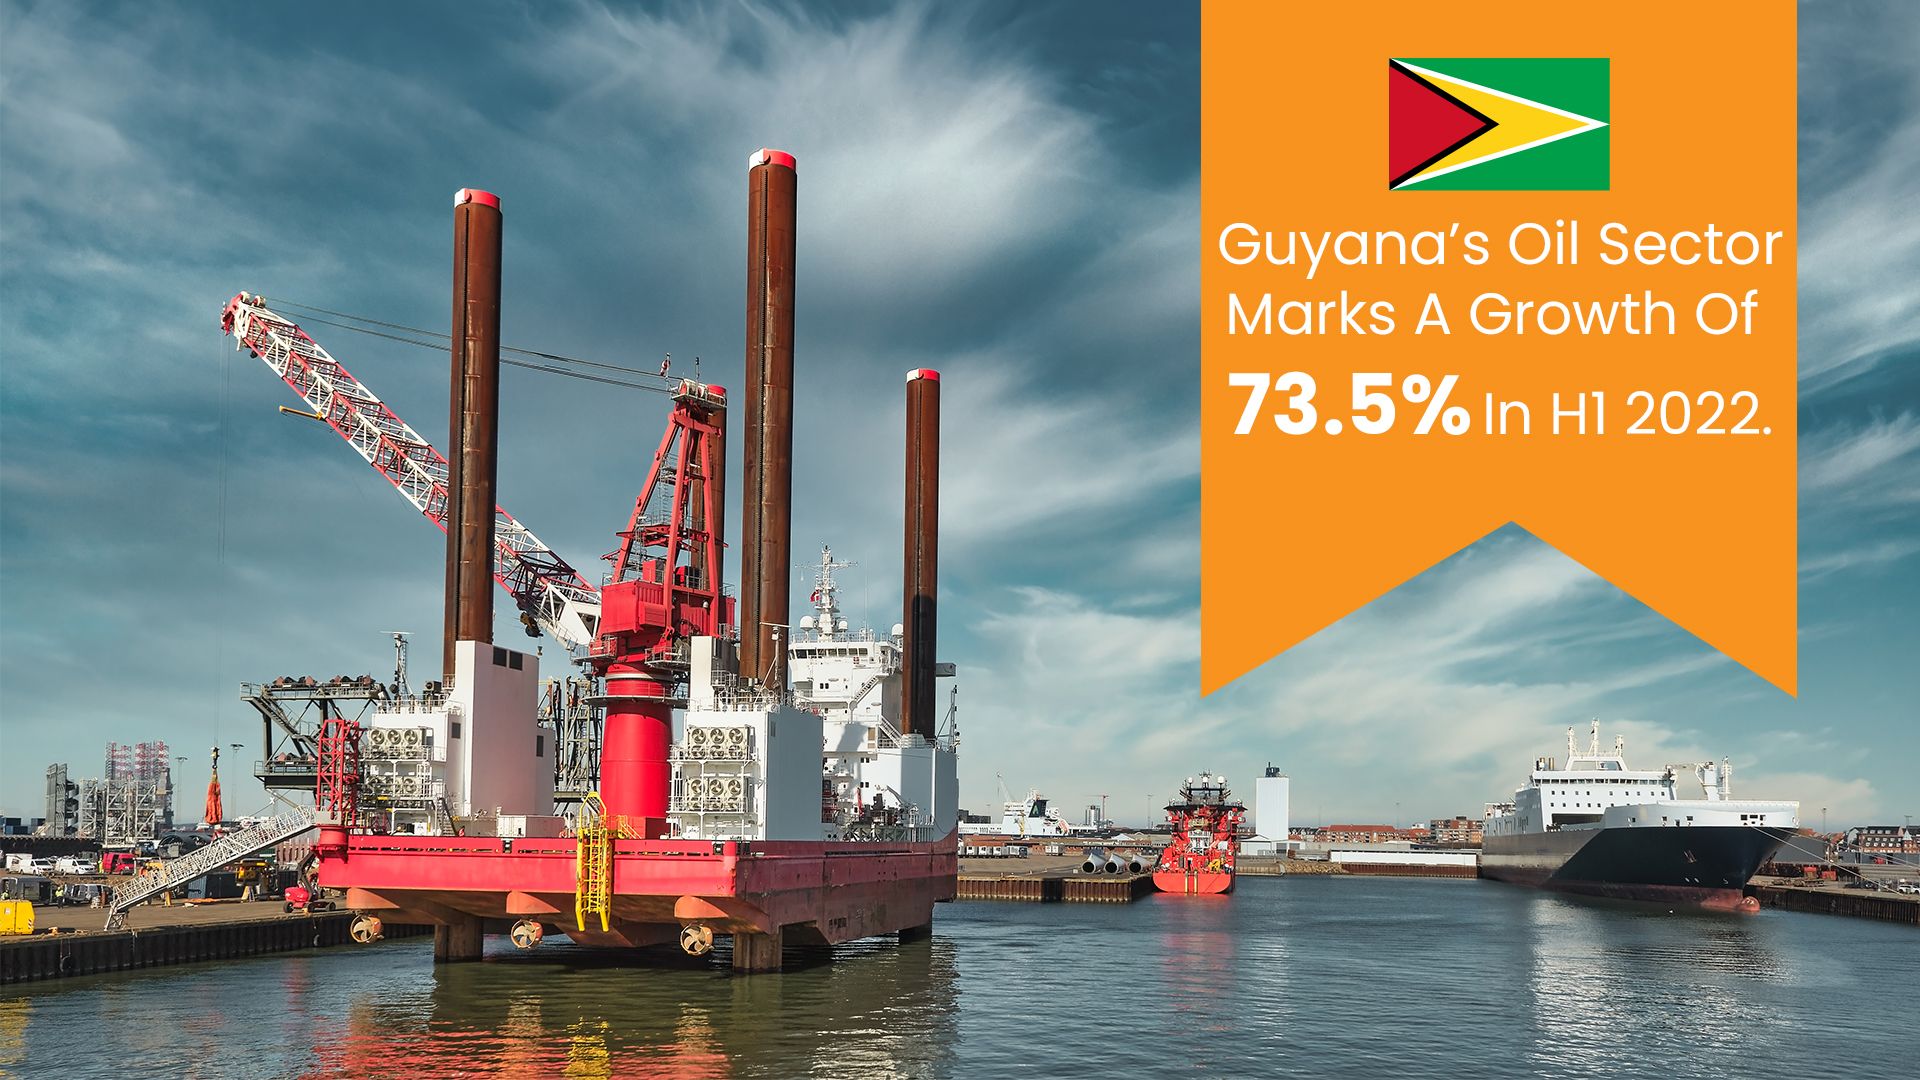 Guyana’s Oil Sector Marks A Growth Of 73.5% In H1 2022.